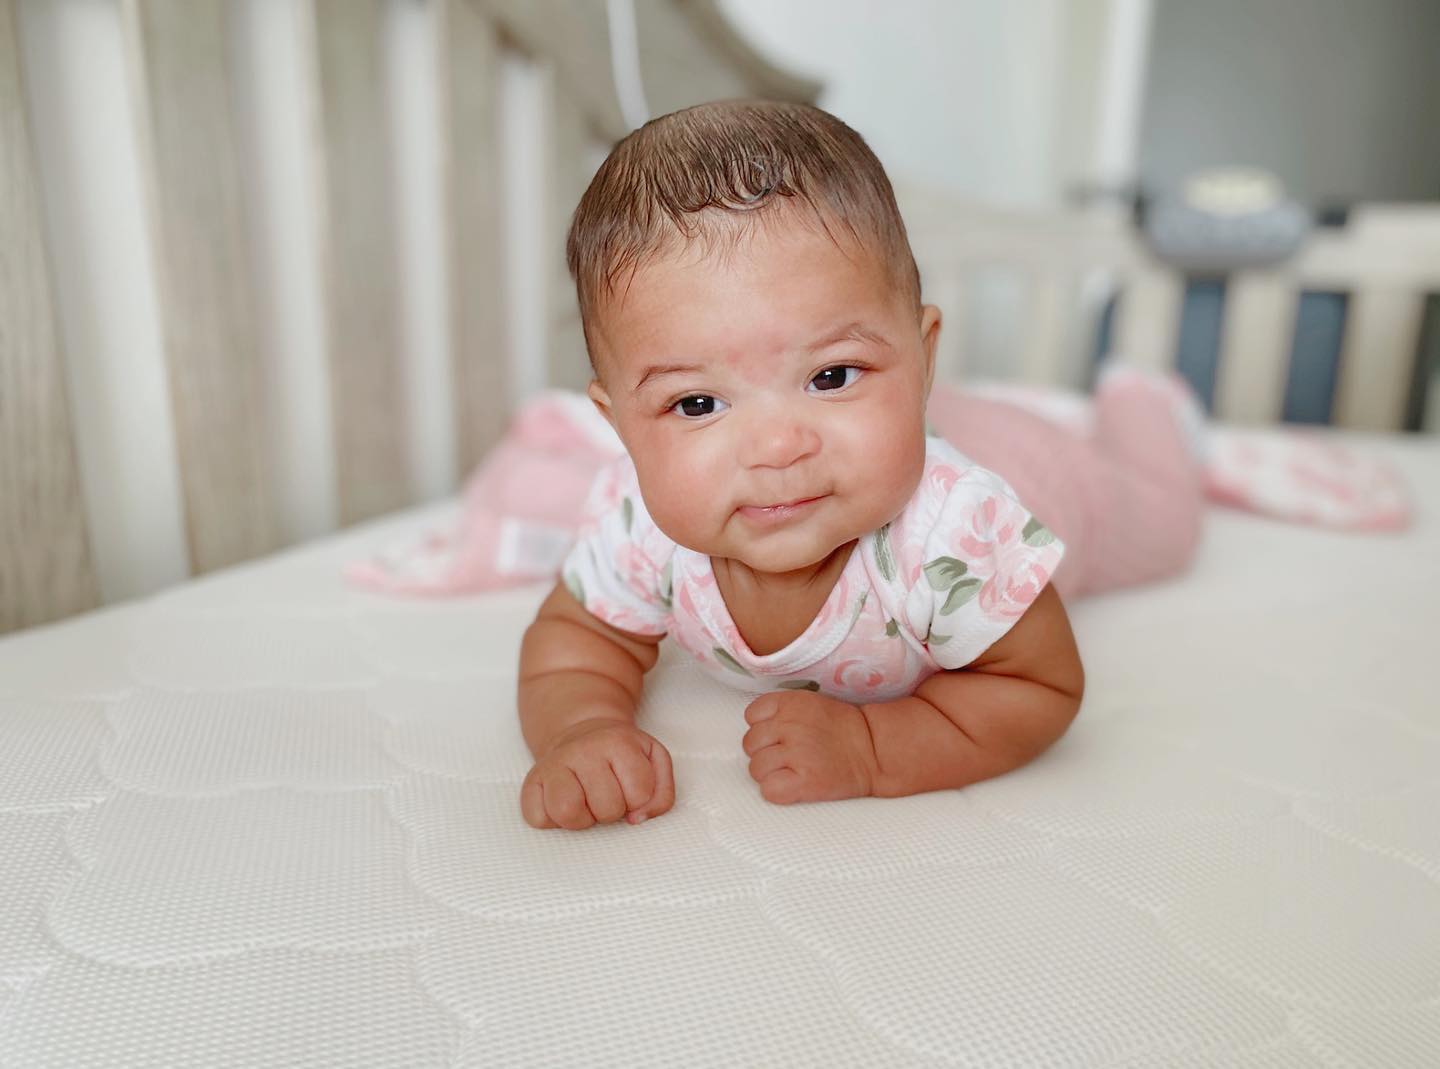 4 Tummy Time Tips from a Pediatric Physical Therapist